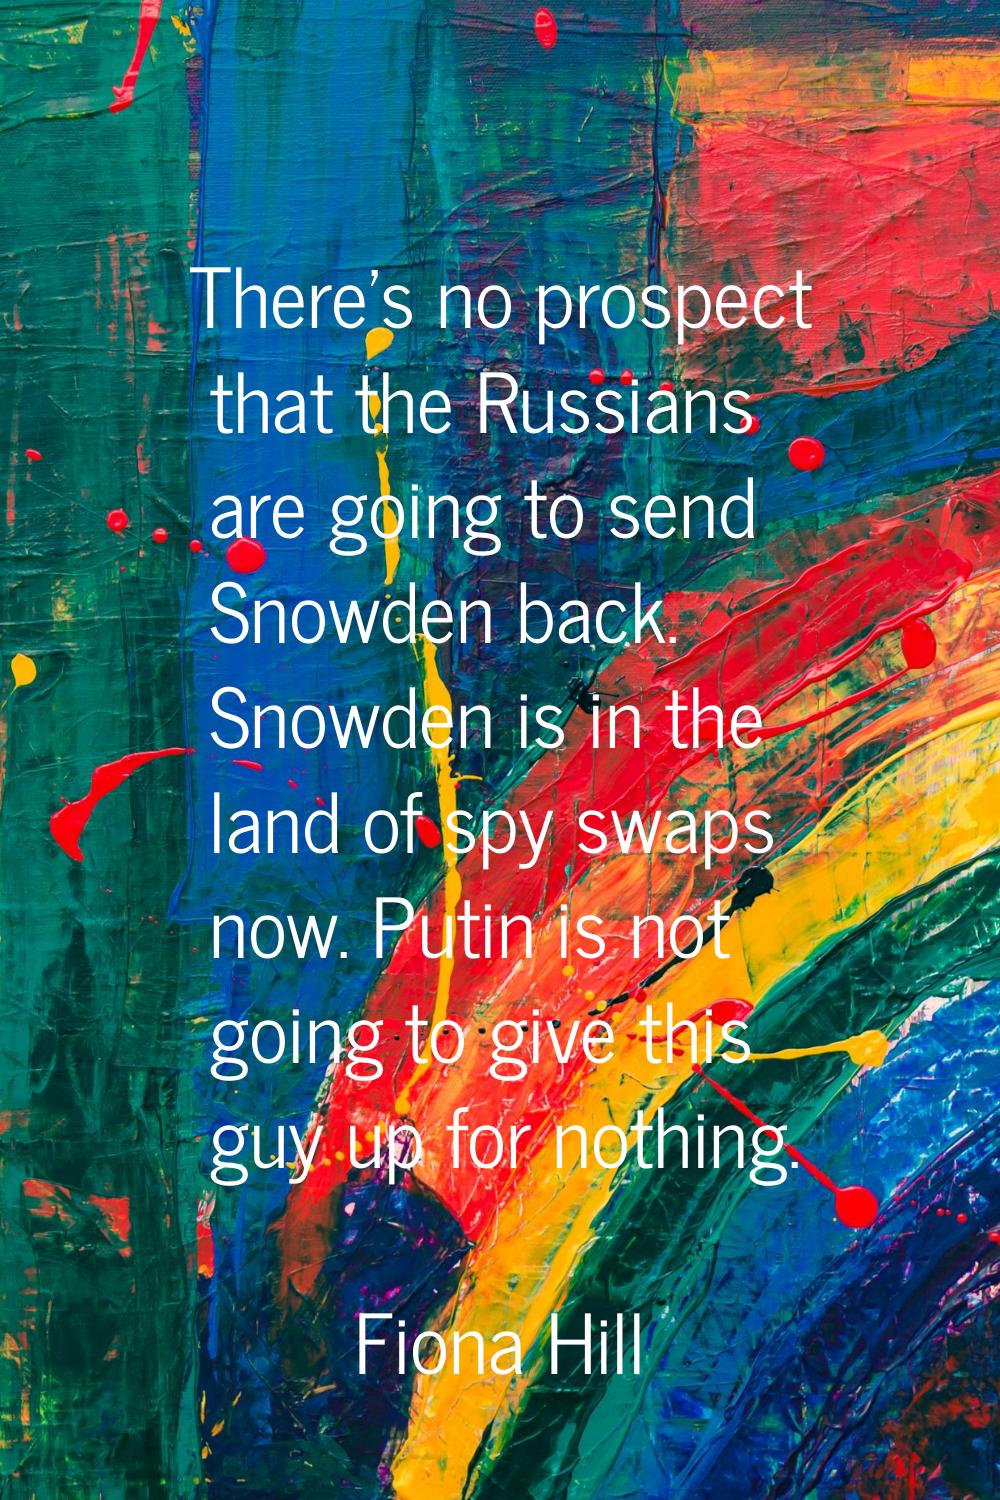 There's no prospect that the Russians are going to send Snowden back. Snowden is in the land of spy